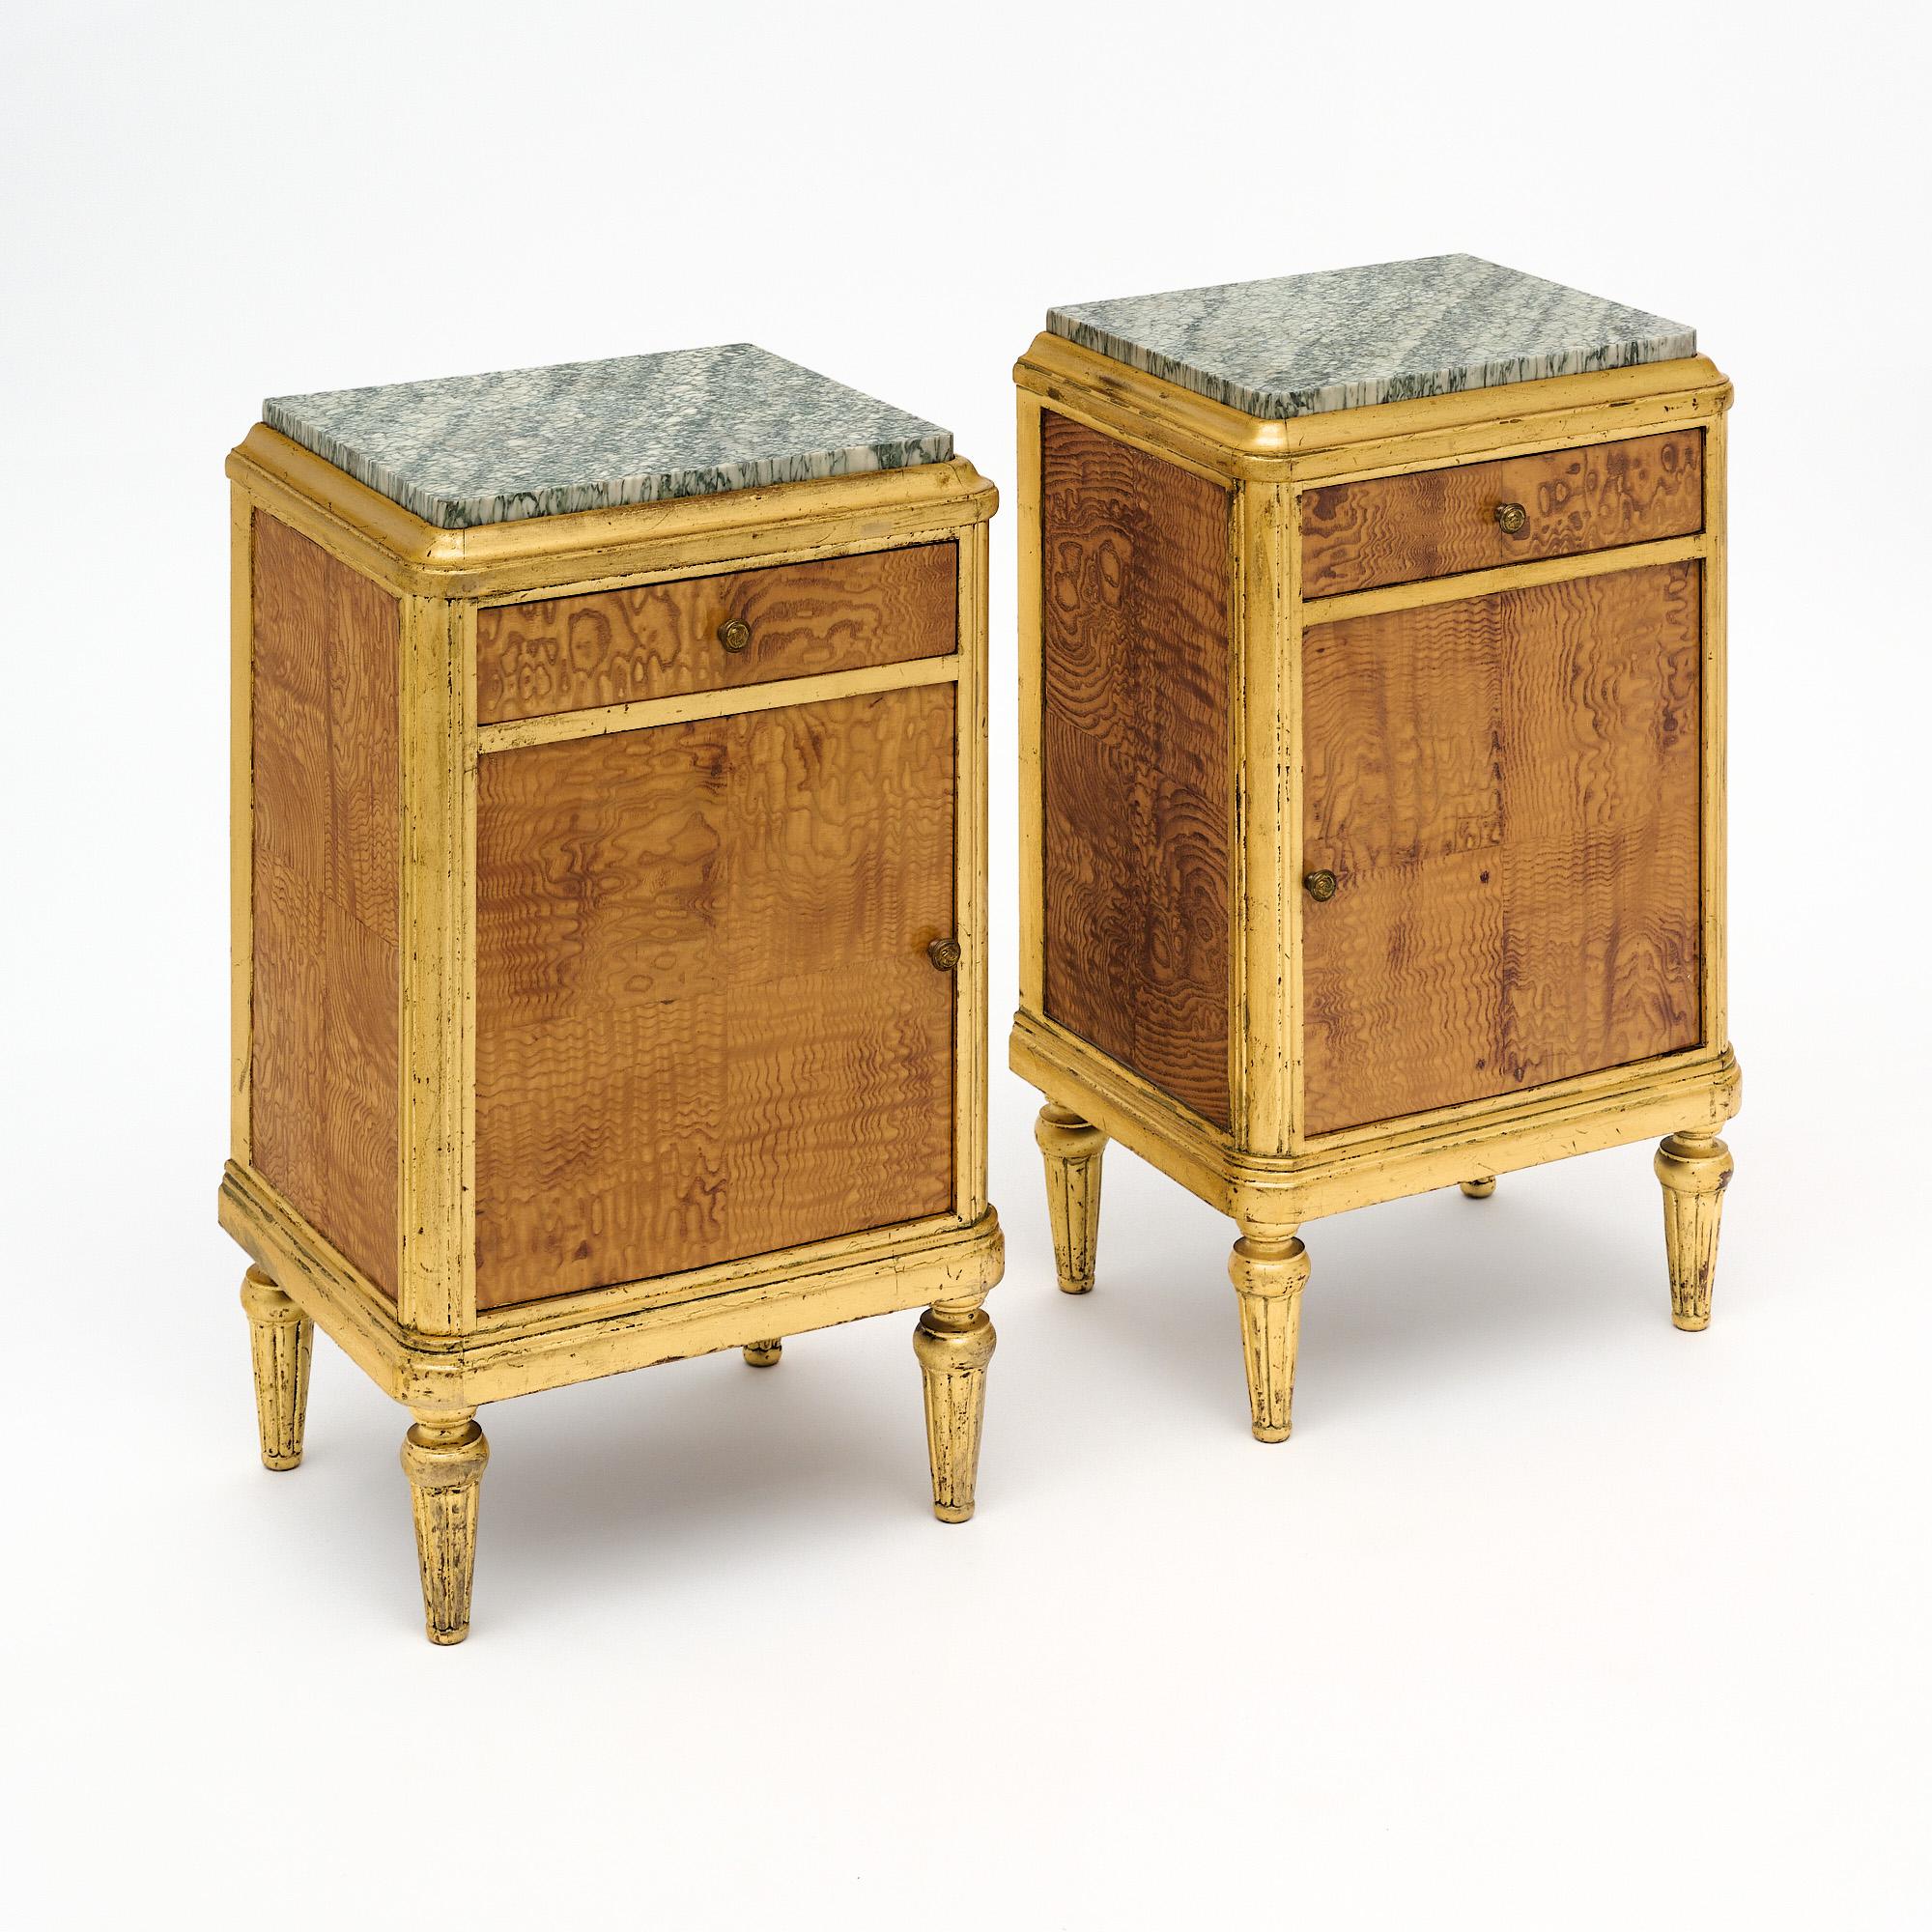 Bed Side tables from the period in France. The body of the cabinets is crafted with burled elm wood on the front of the doors, dovetailed drawer, and sides. Each features the original knobs. The legs and trim throughout are gold leafed. The doors